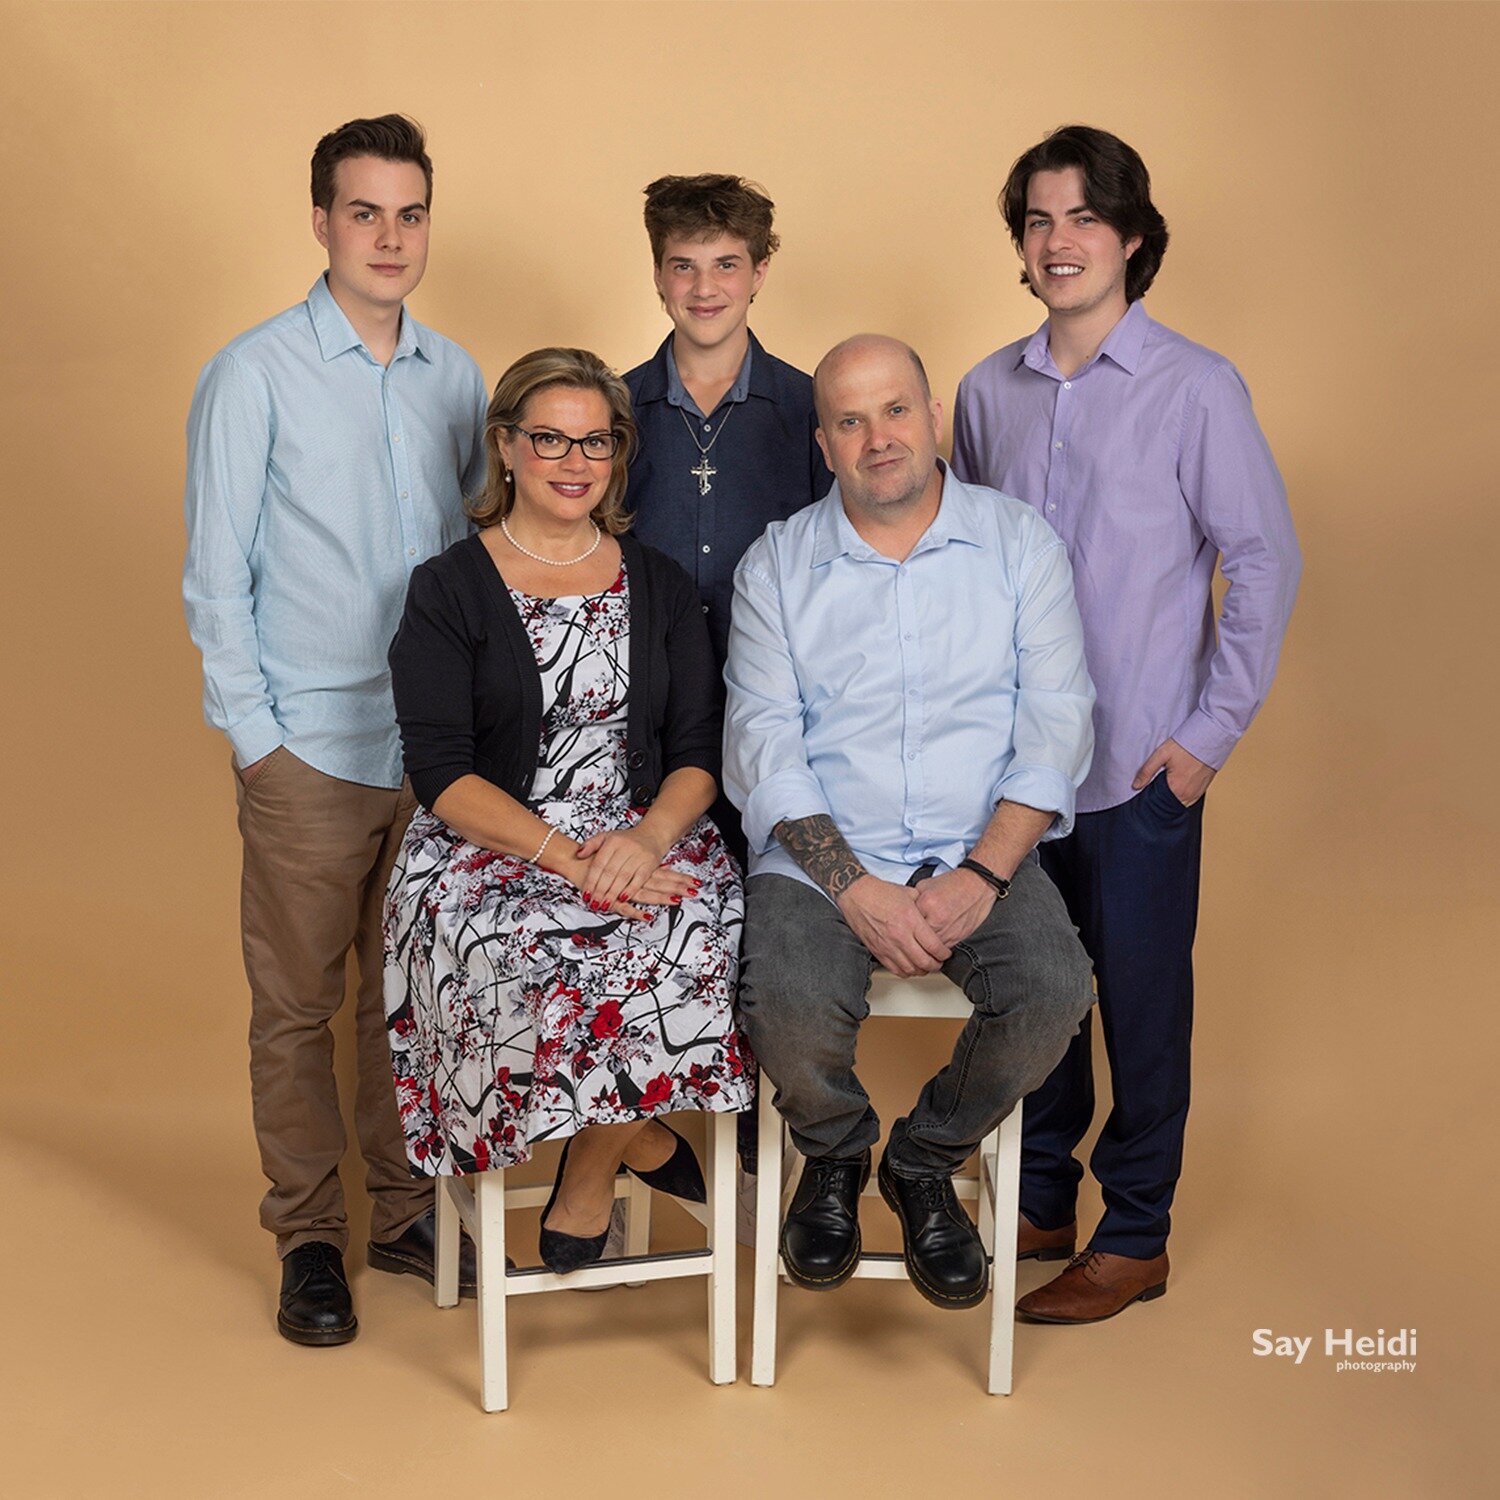 Freshly captured family portrait with teenage/young adult sons - it was a present for mothers day. 

#melbournefamilyshoot #melbournemothersday #melbournephotographystudio #melbournefamilys #moorabbin